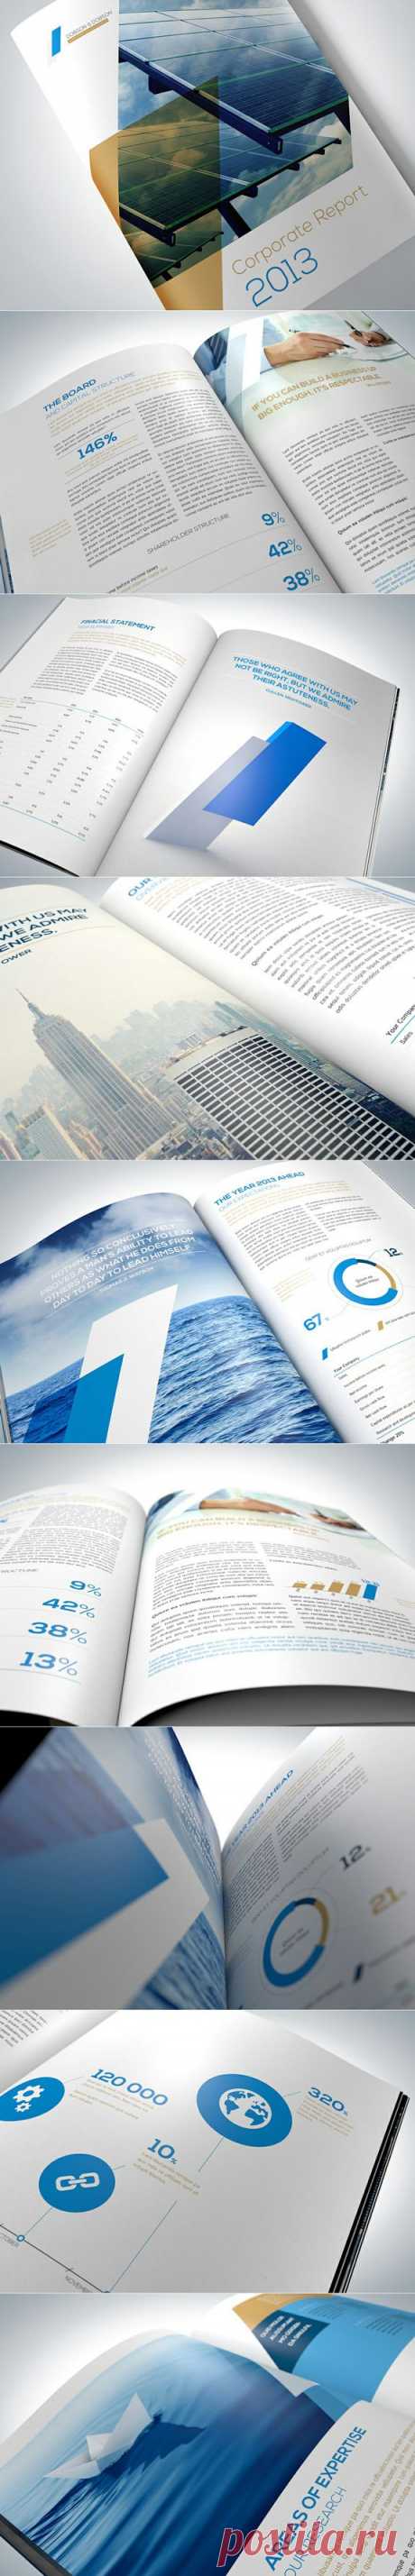 Interesting and Unusual Brochure Examples | The Design Work